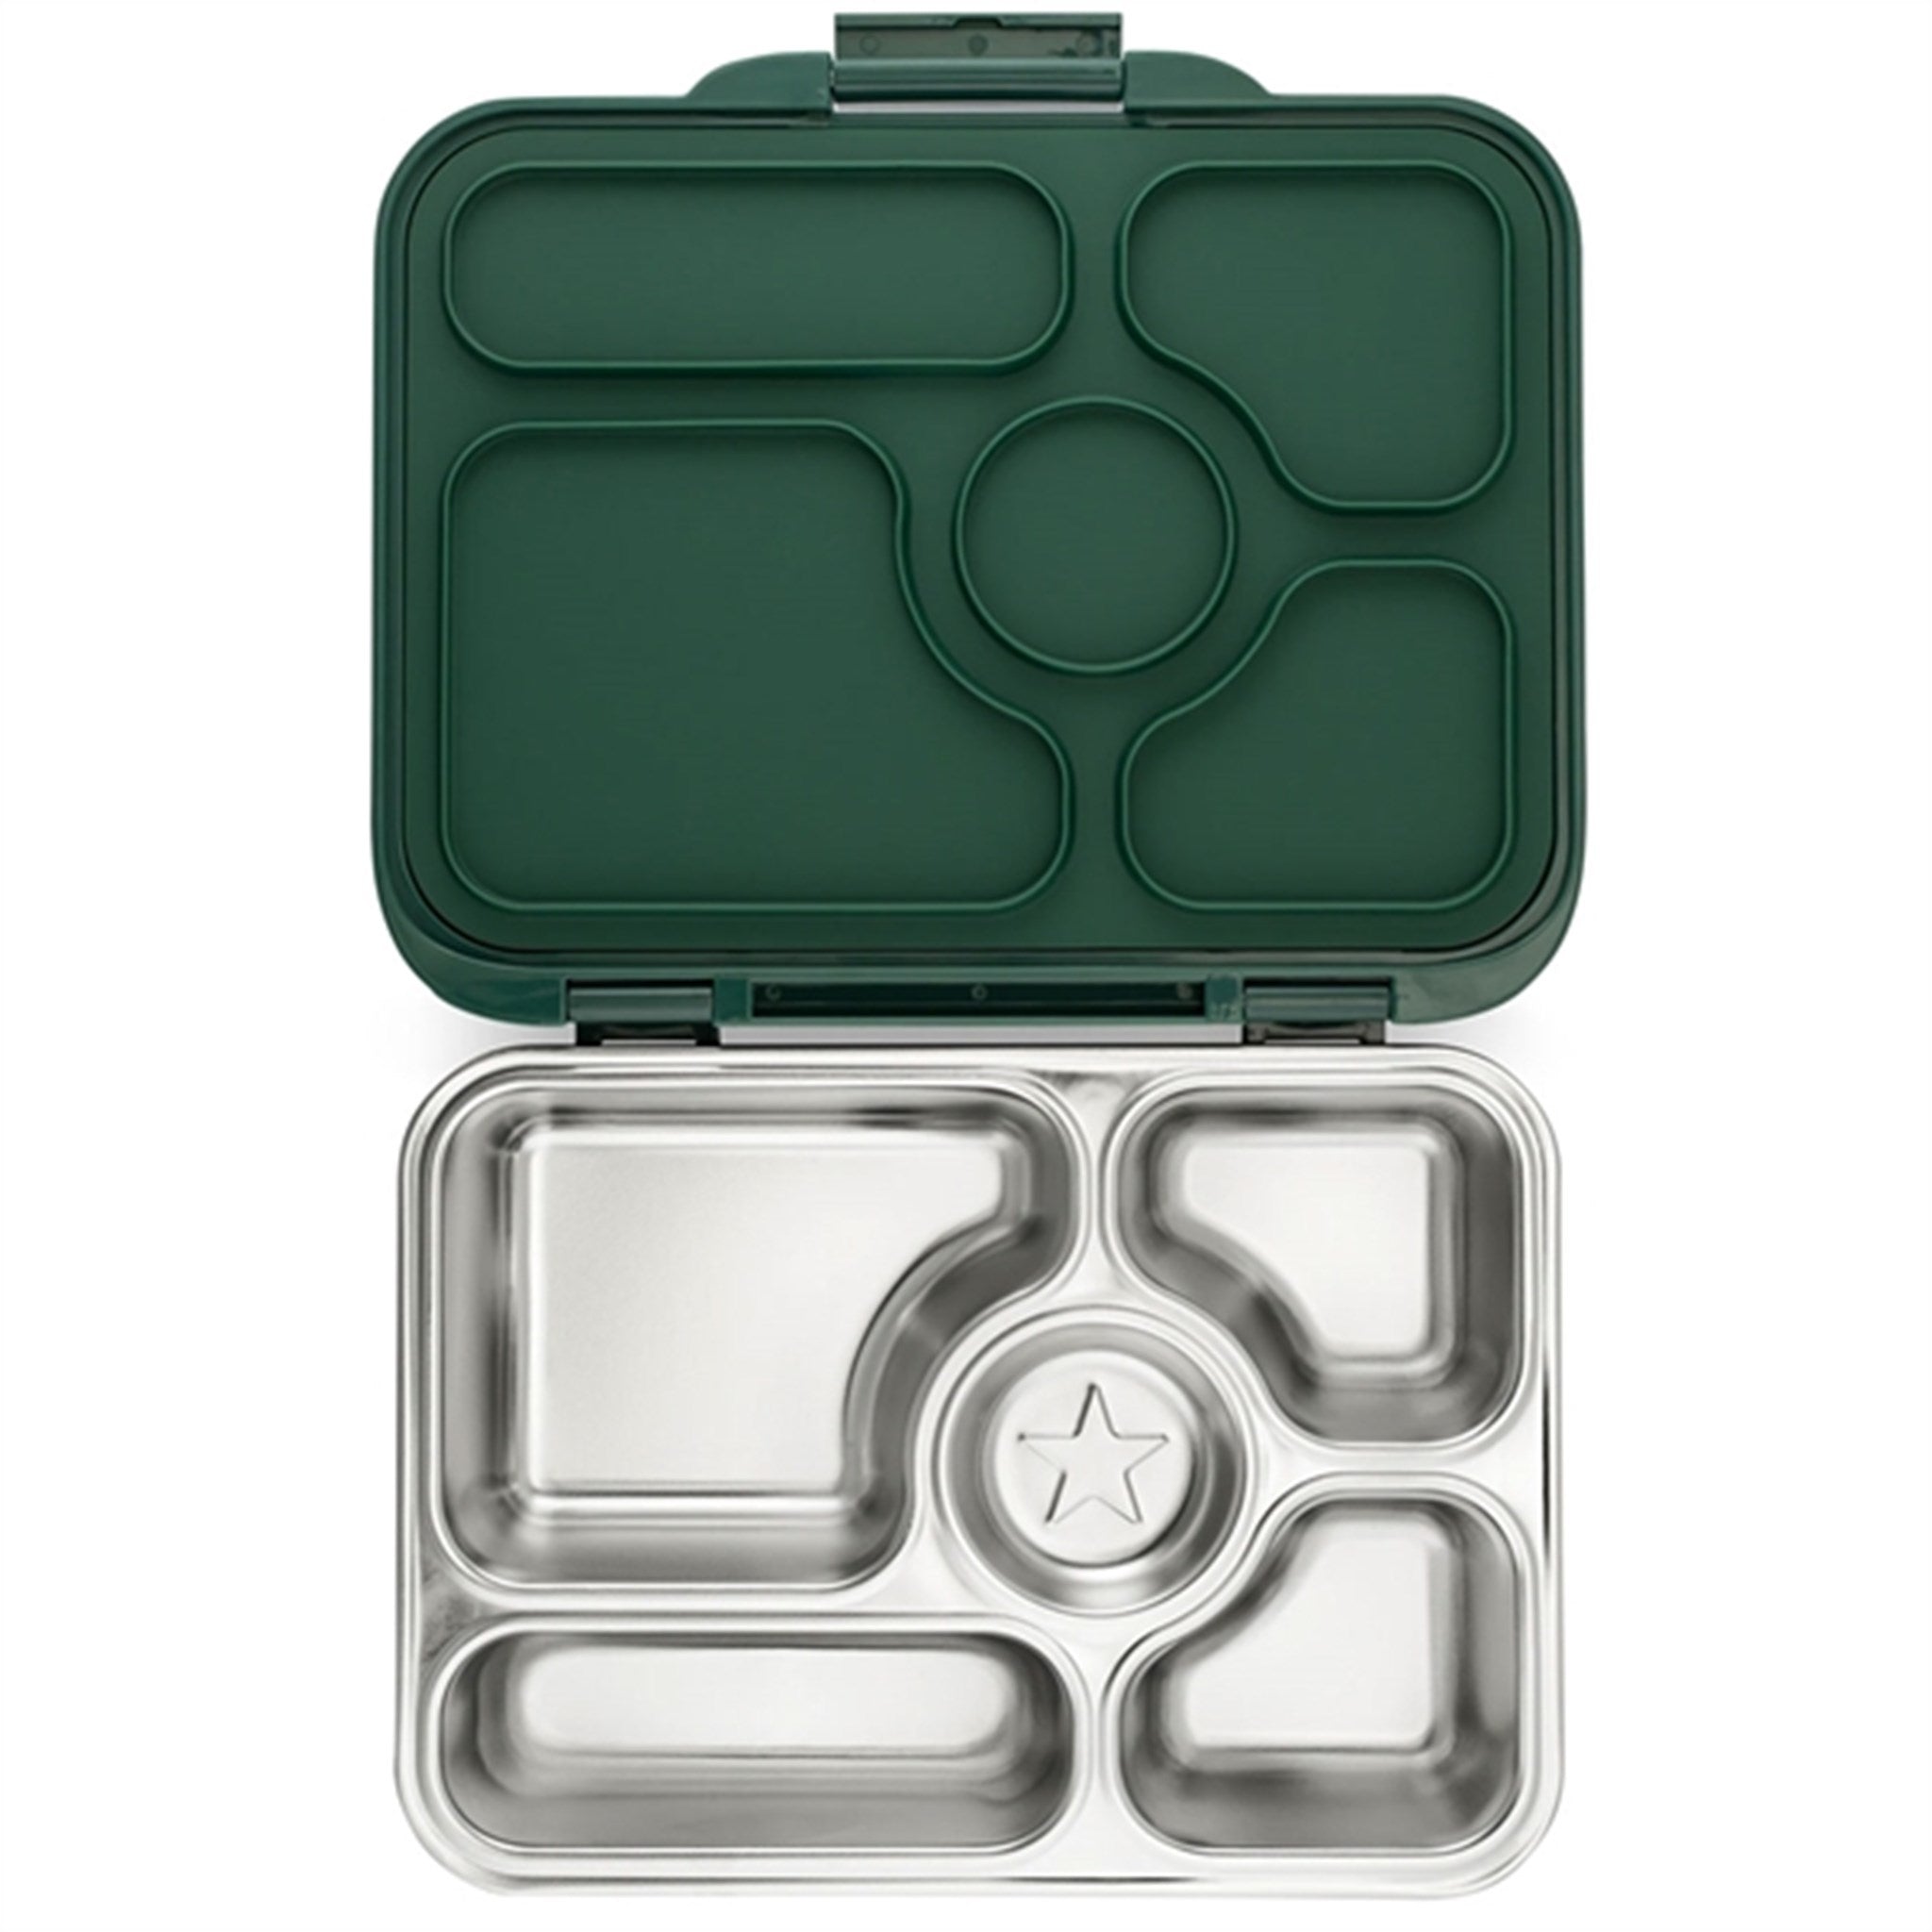 Yumbox Presto Stainless Steel Lunch Box Kale Green 8